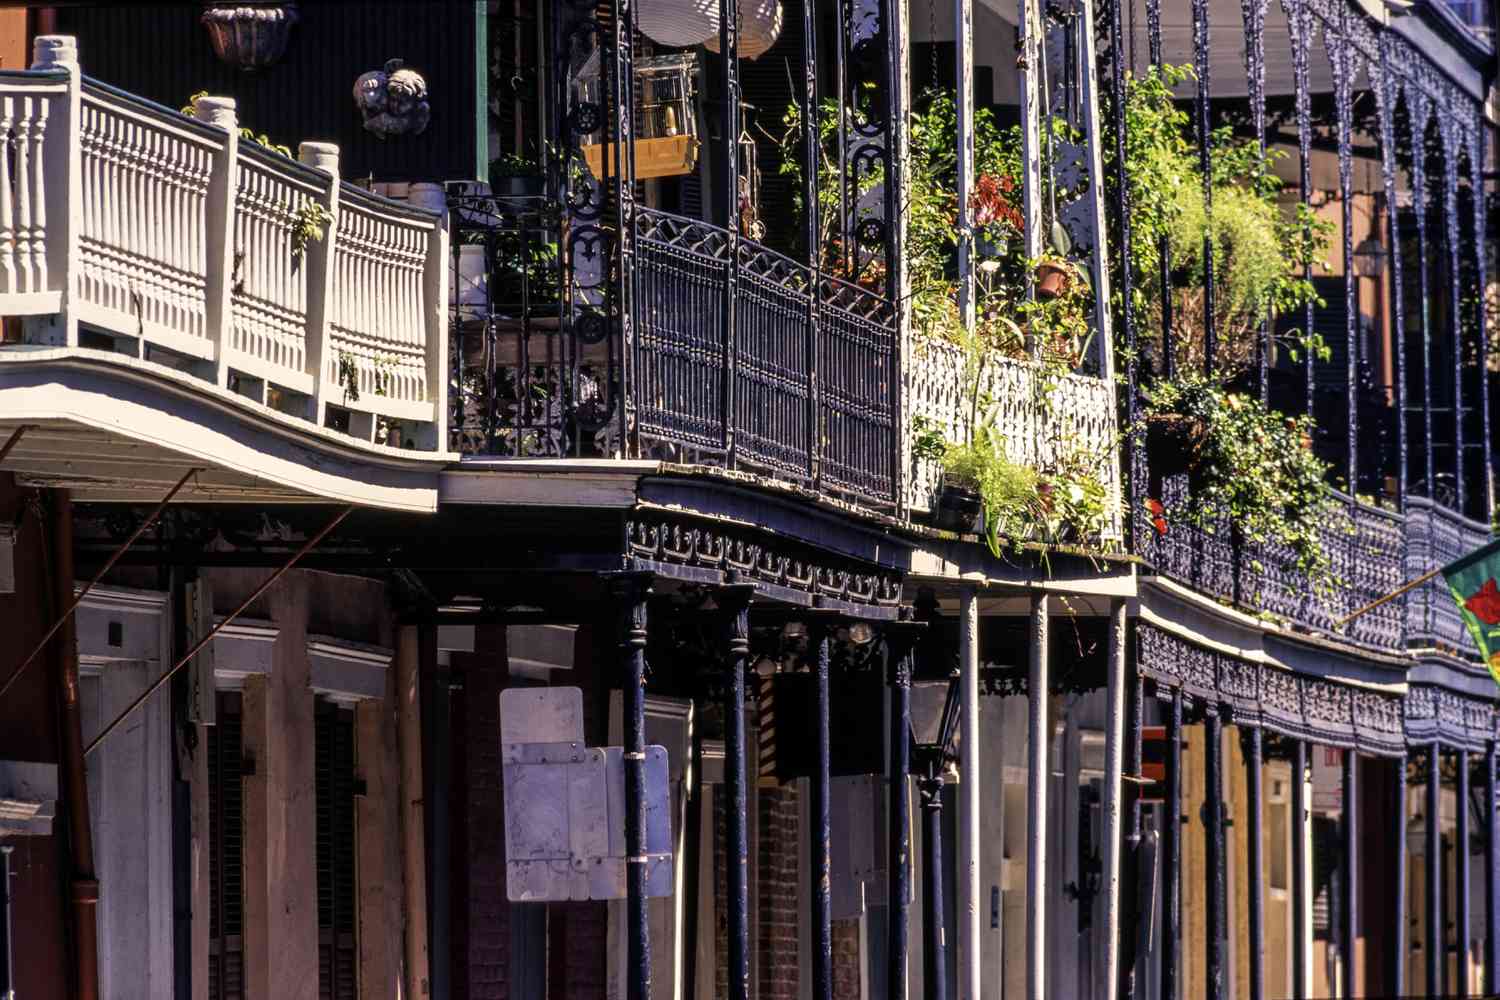 Row of historic buildings with wrought-iron balconies in the French Quarter of New Orleans